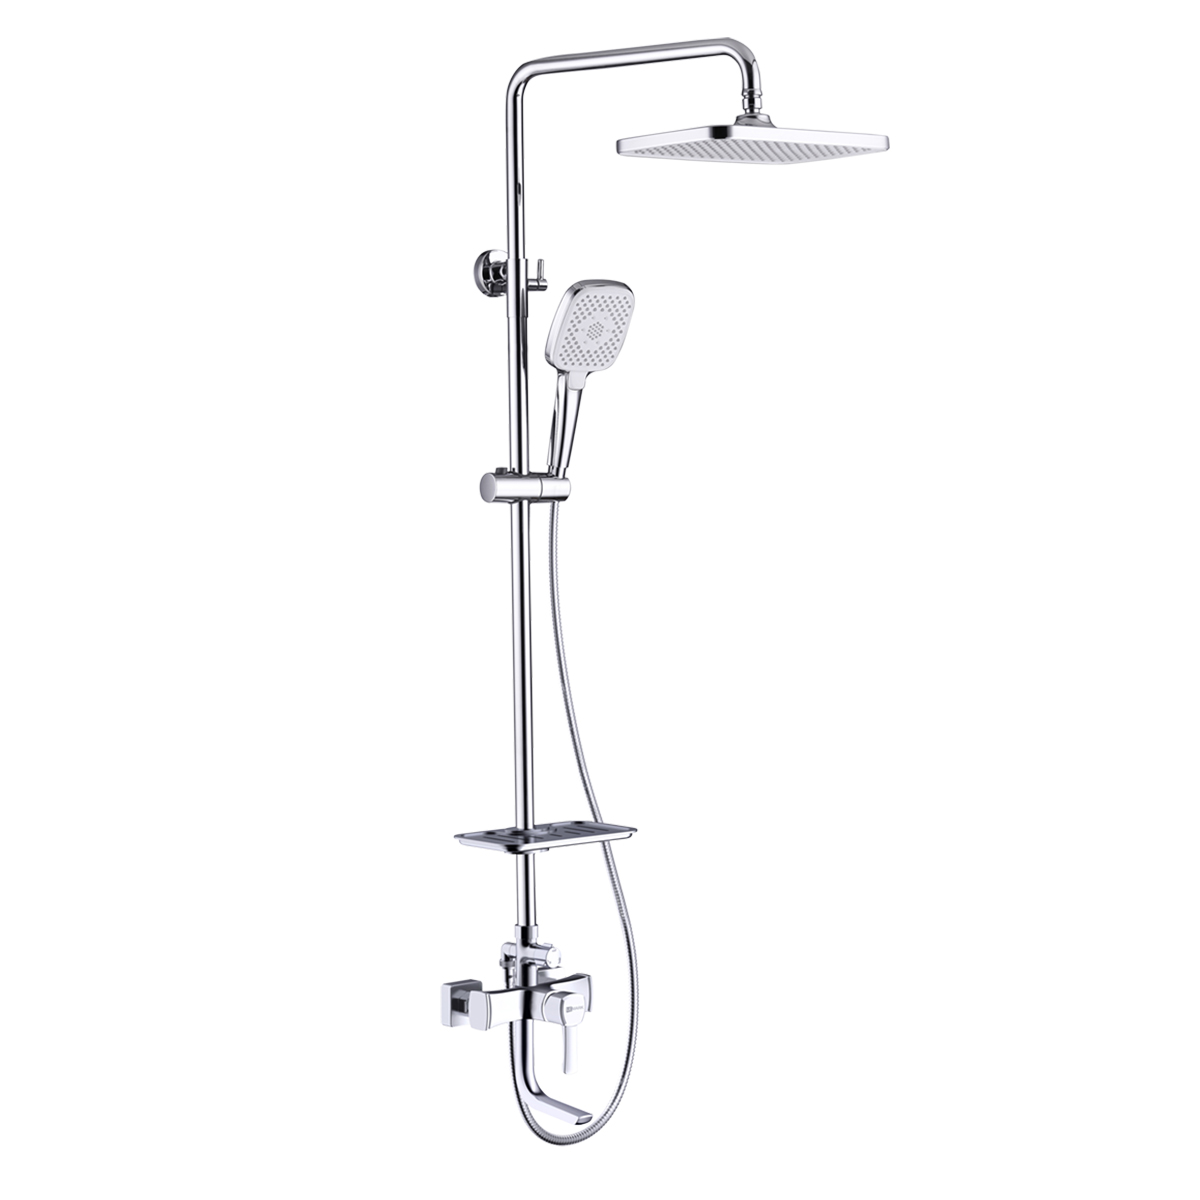 LM0562C Bath and shower faucet with adjustable rod height, swivel spout and «Tropical rain» shower head